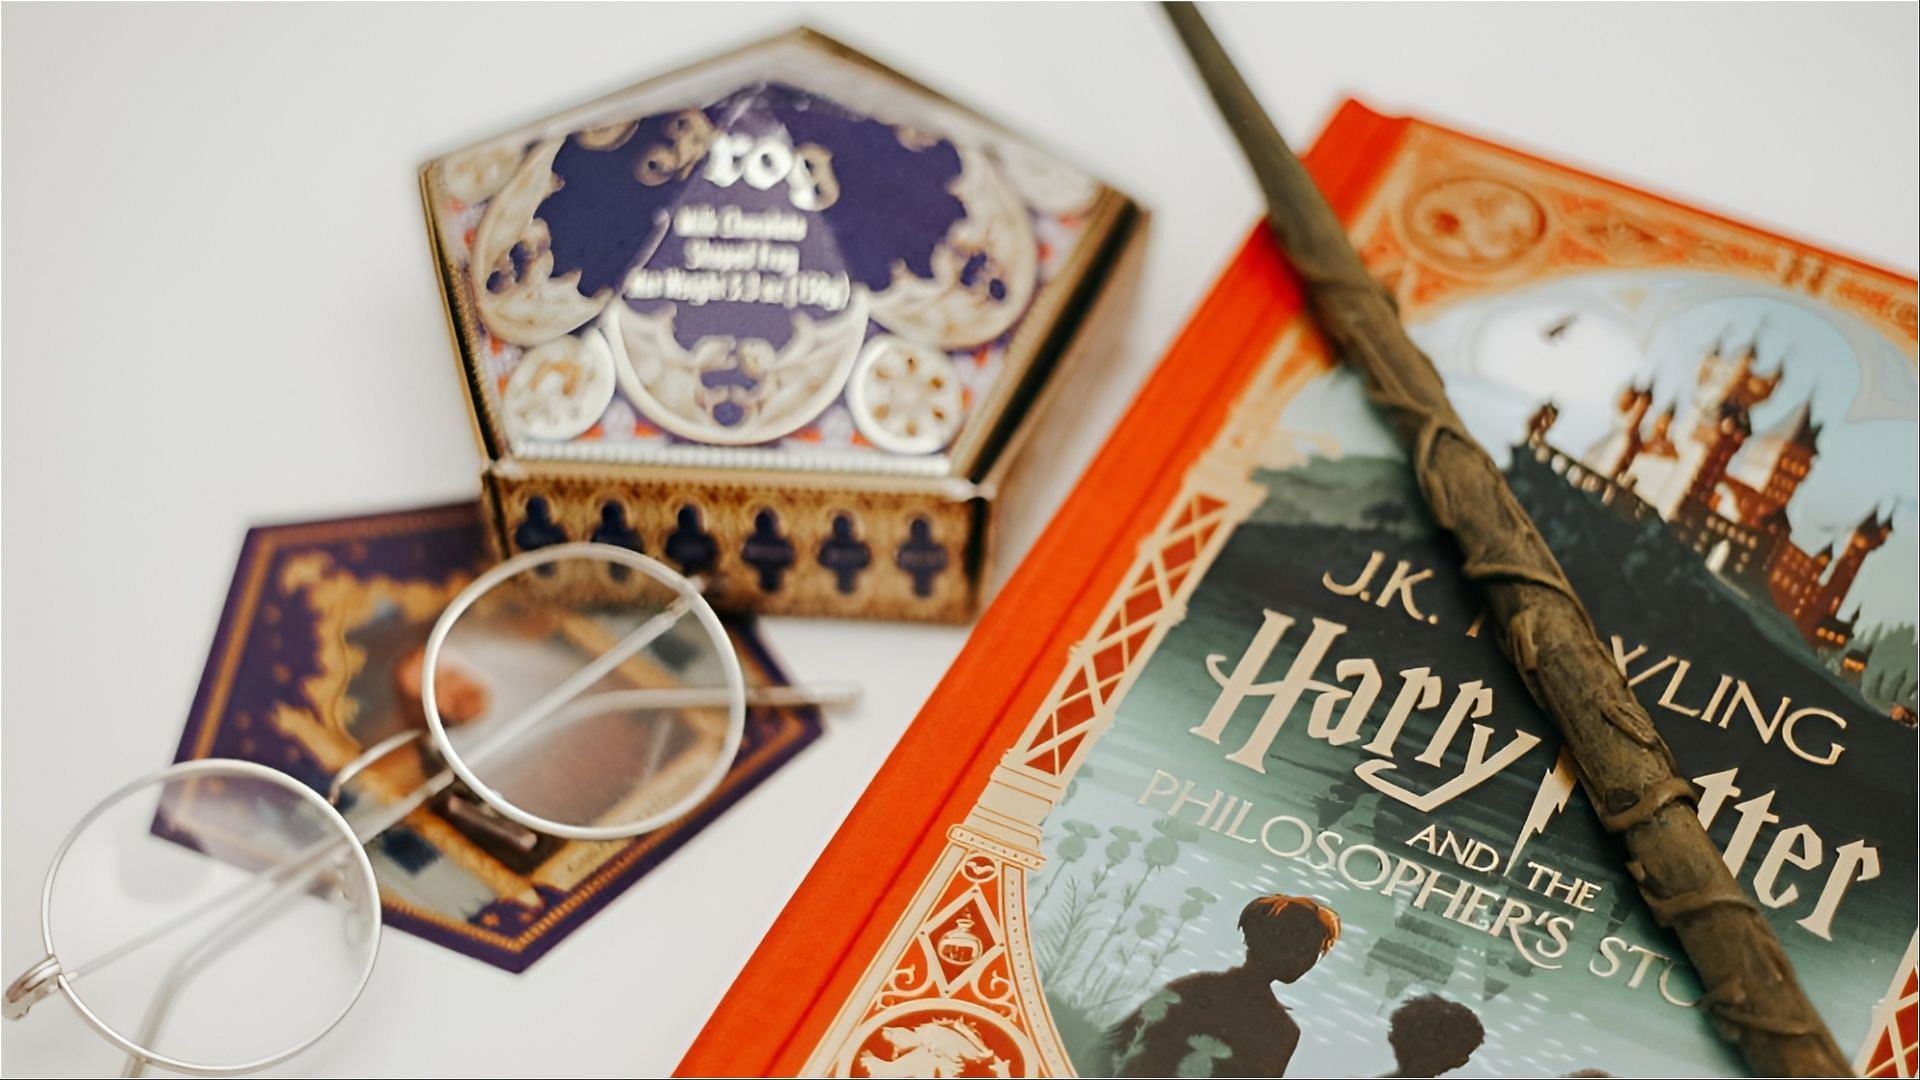 A Harry Potter fan with a wand was searched by police officers inside a hotel (Representative image via Unsplash)